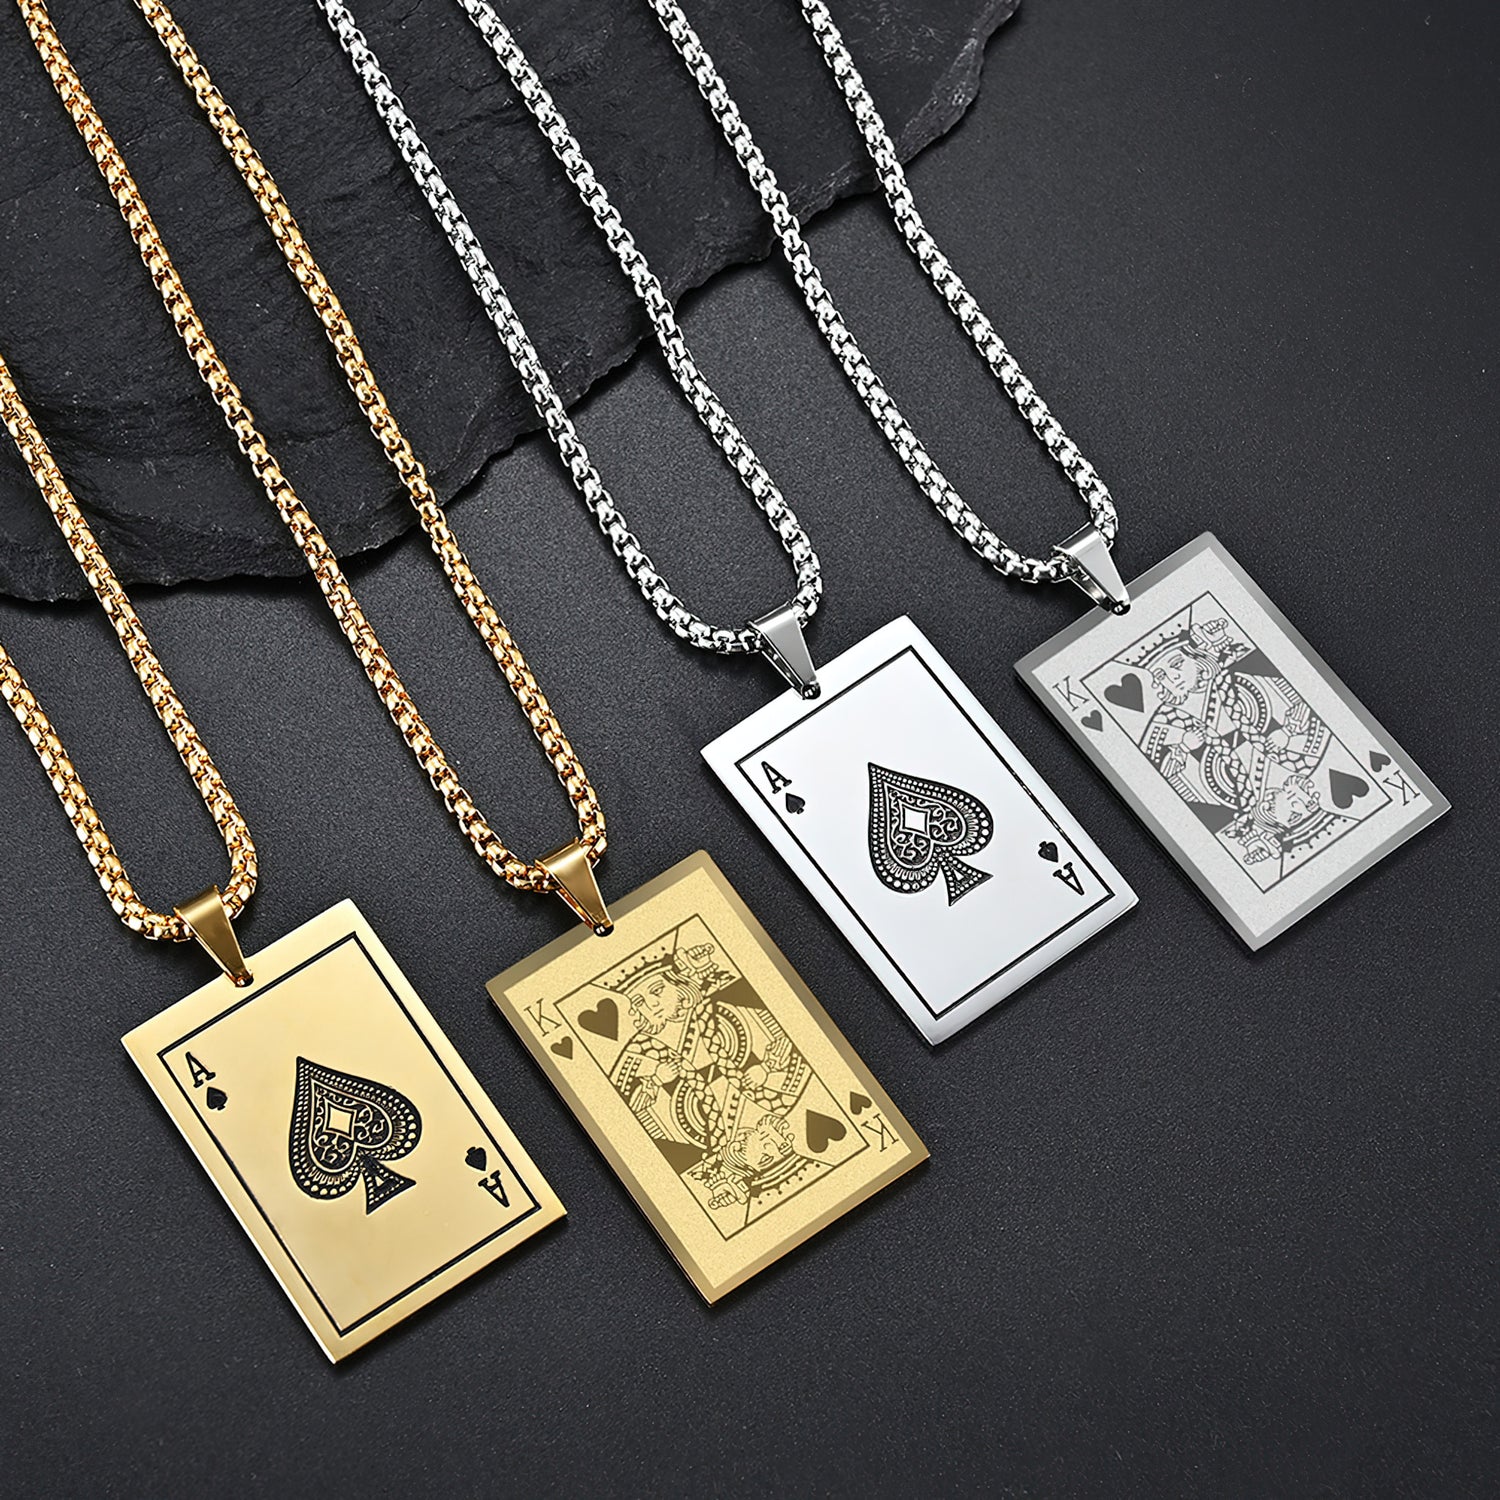 Men's Necklace Pendant Personality Lucky Ace of Spades Necklace for Men  Stainless Steel Cards Pendant Punk Rock Male Statement Jewelry Gifts for  Boyfriend Birthday Unique | Amazon.com